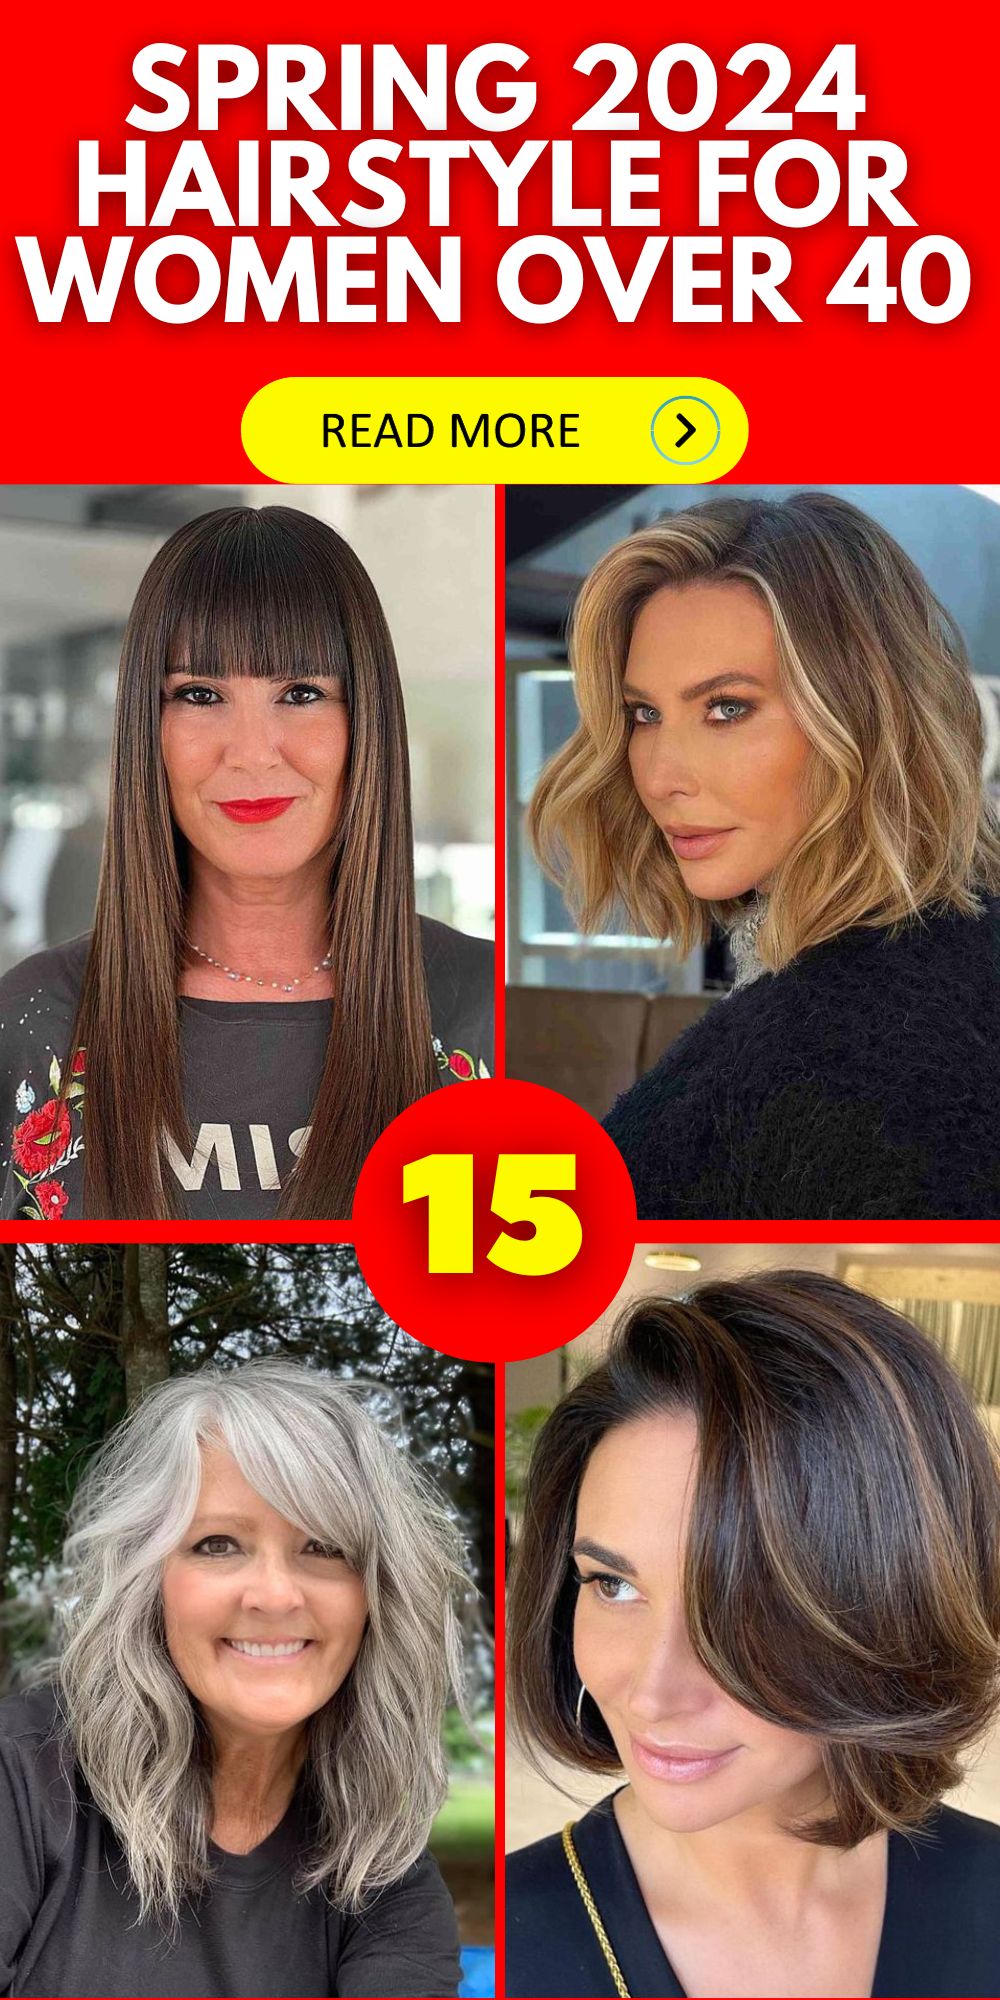 Discover Chic Spring 2024 Hairstyles for the Modern Woman Over 40